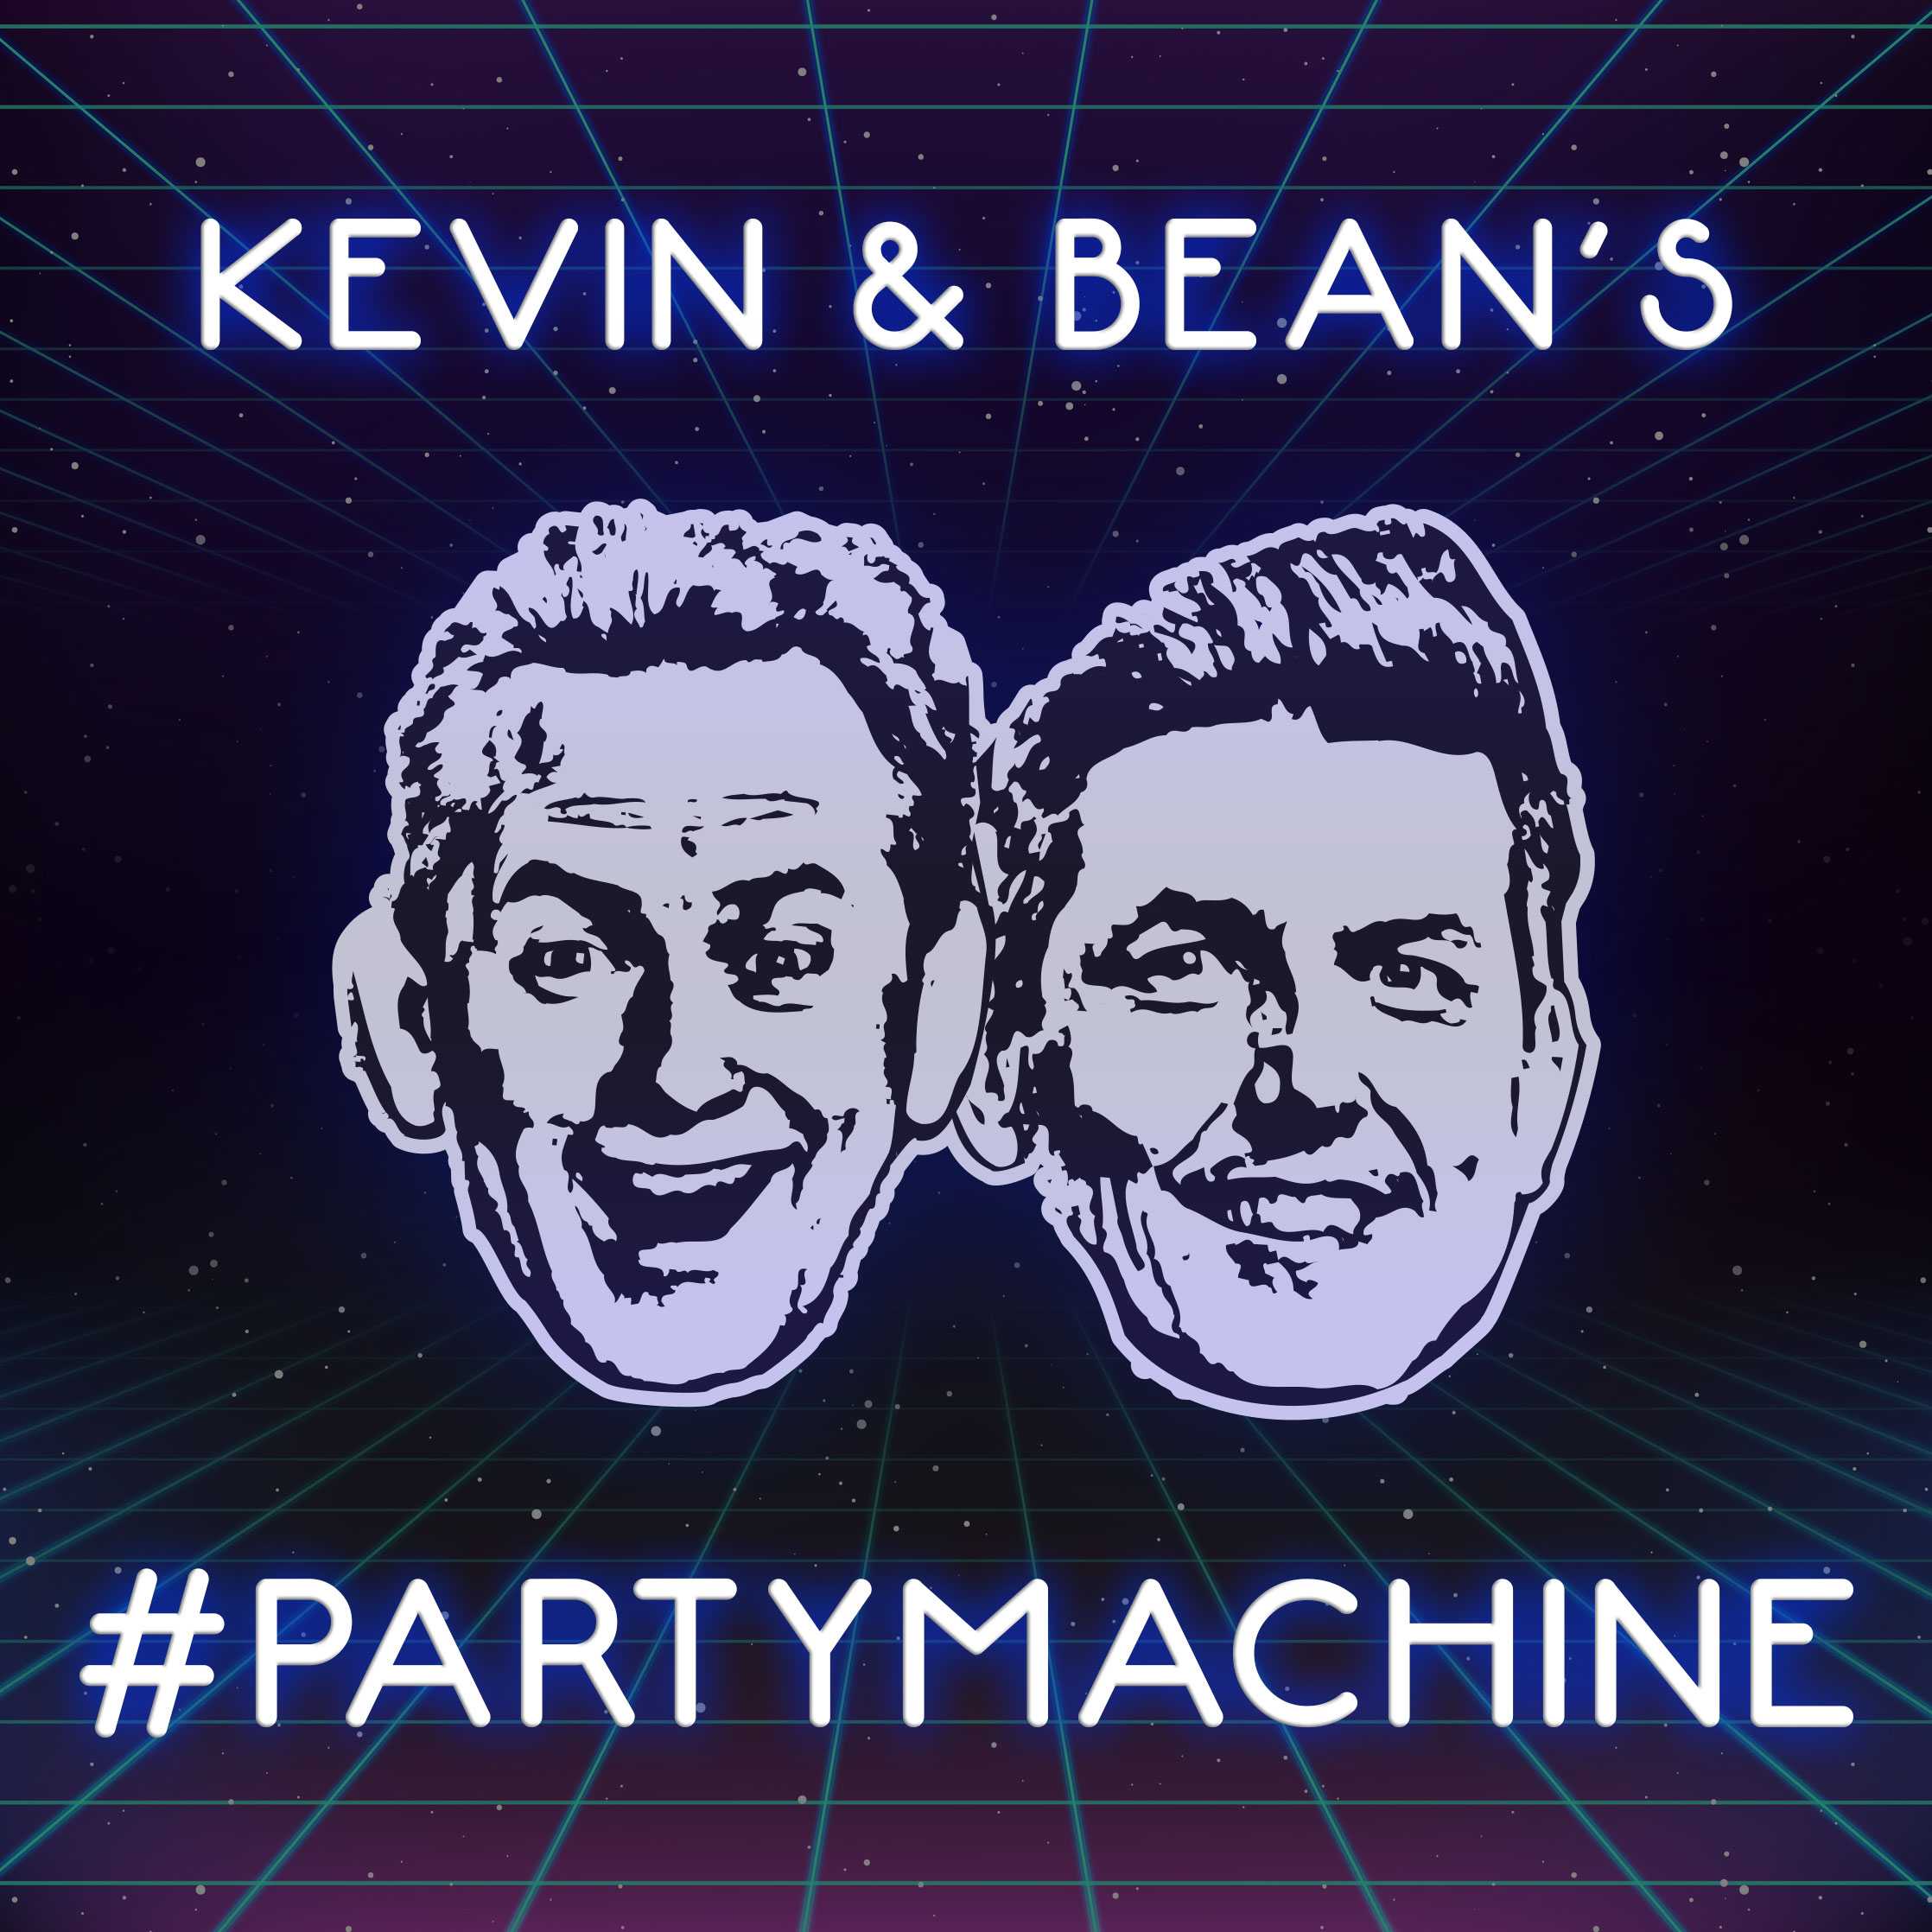 Friday, May 24th: The Kevin & Bean Party Machine